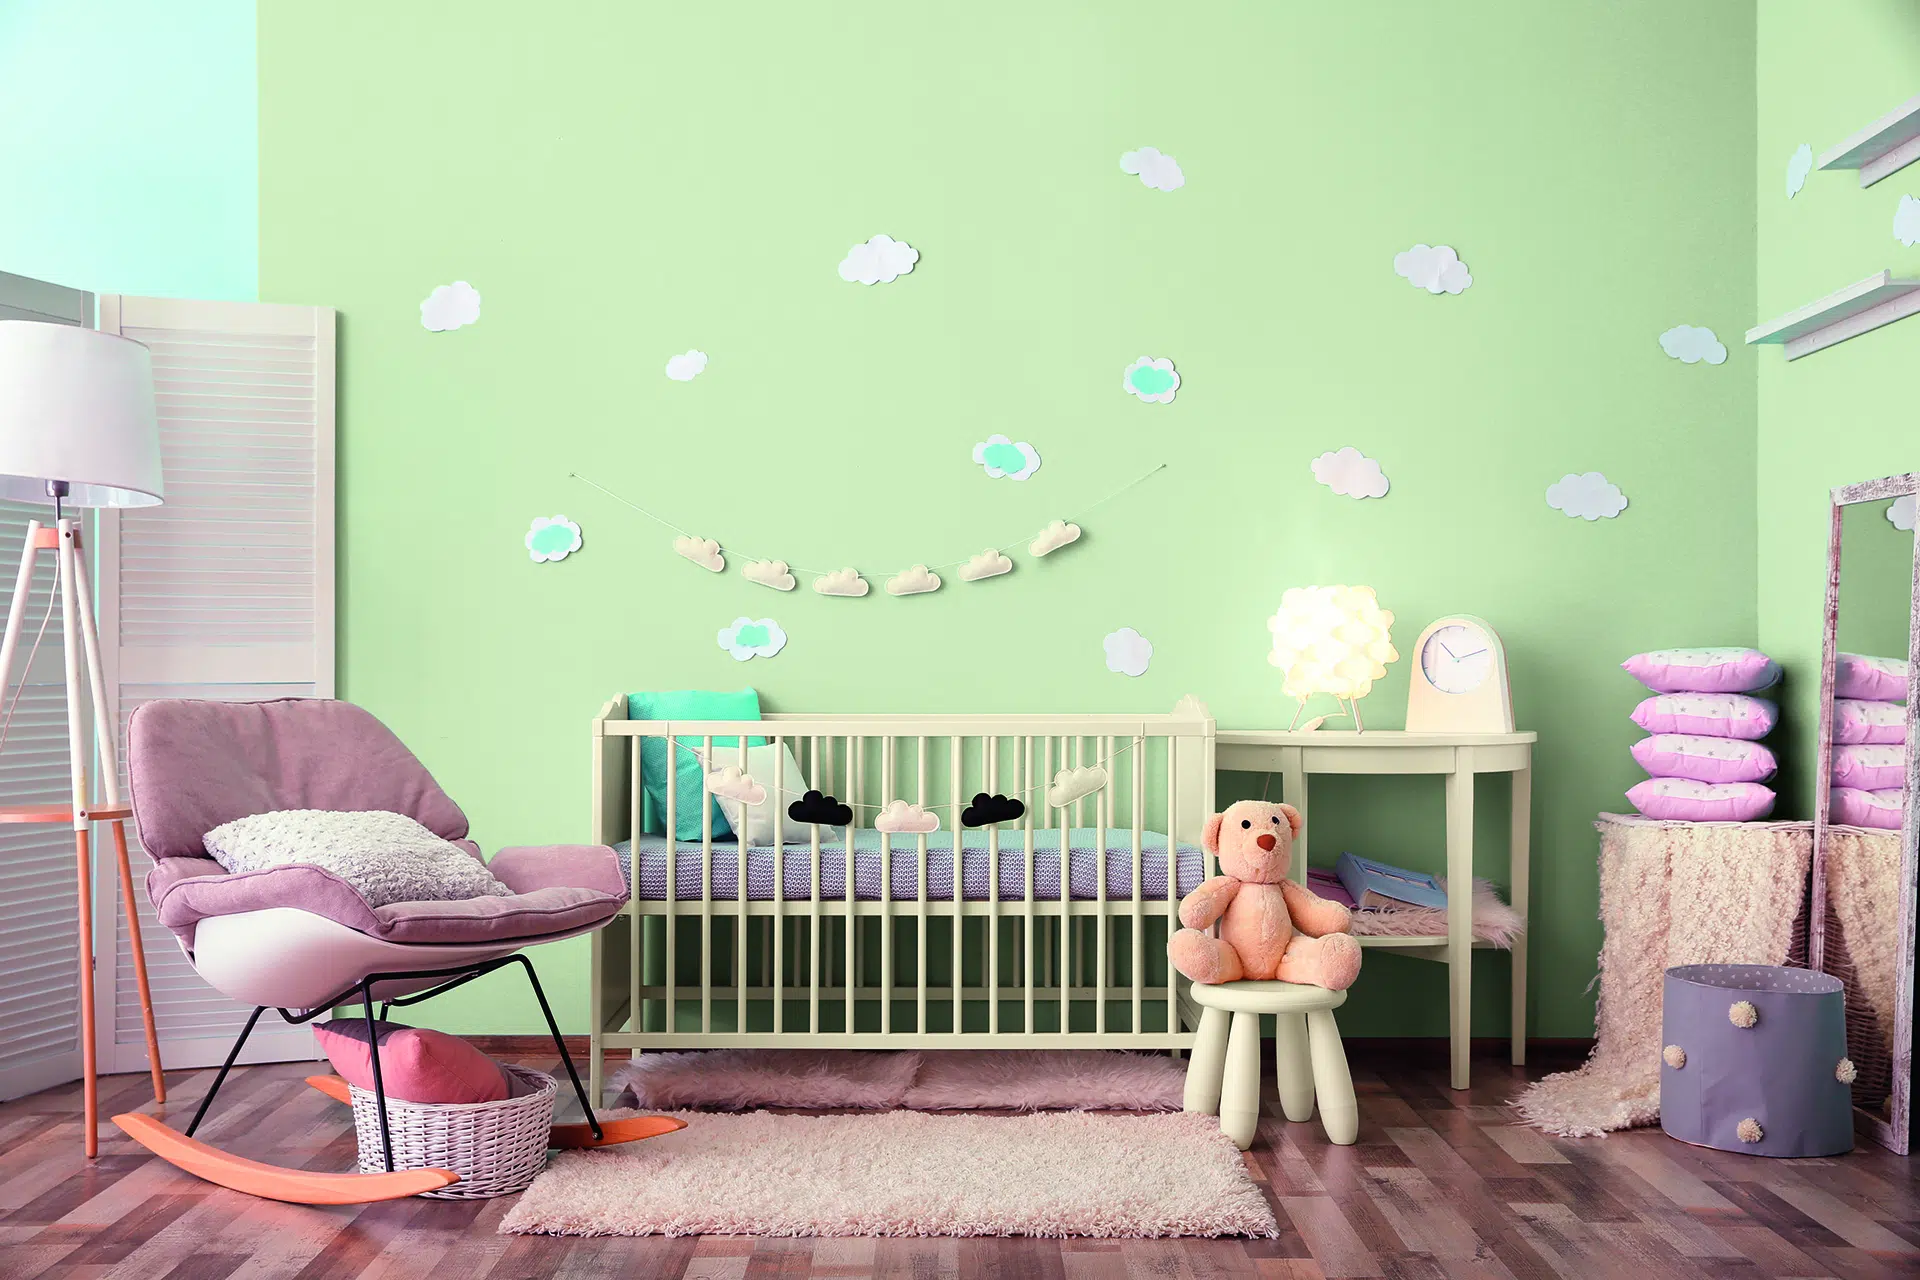 the kids colour collection by Patricia Wakely of Fleetwood Paints - Stillorgan Decor